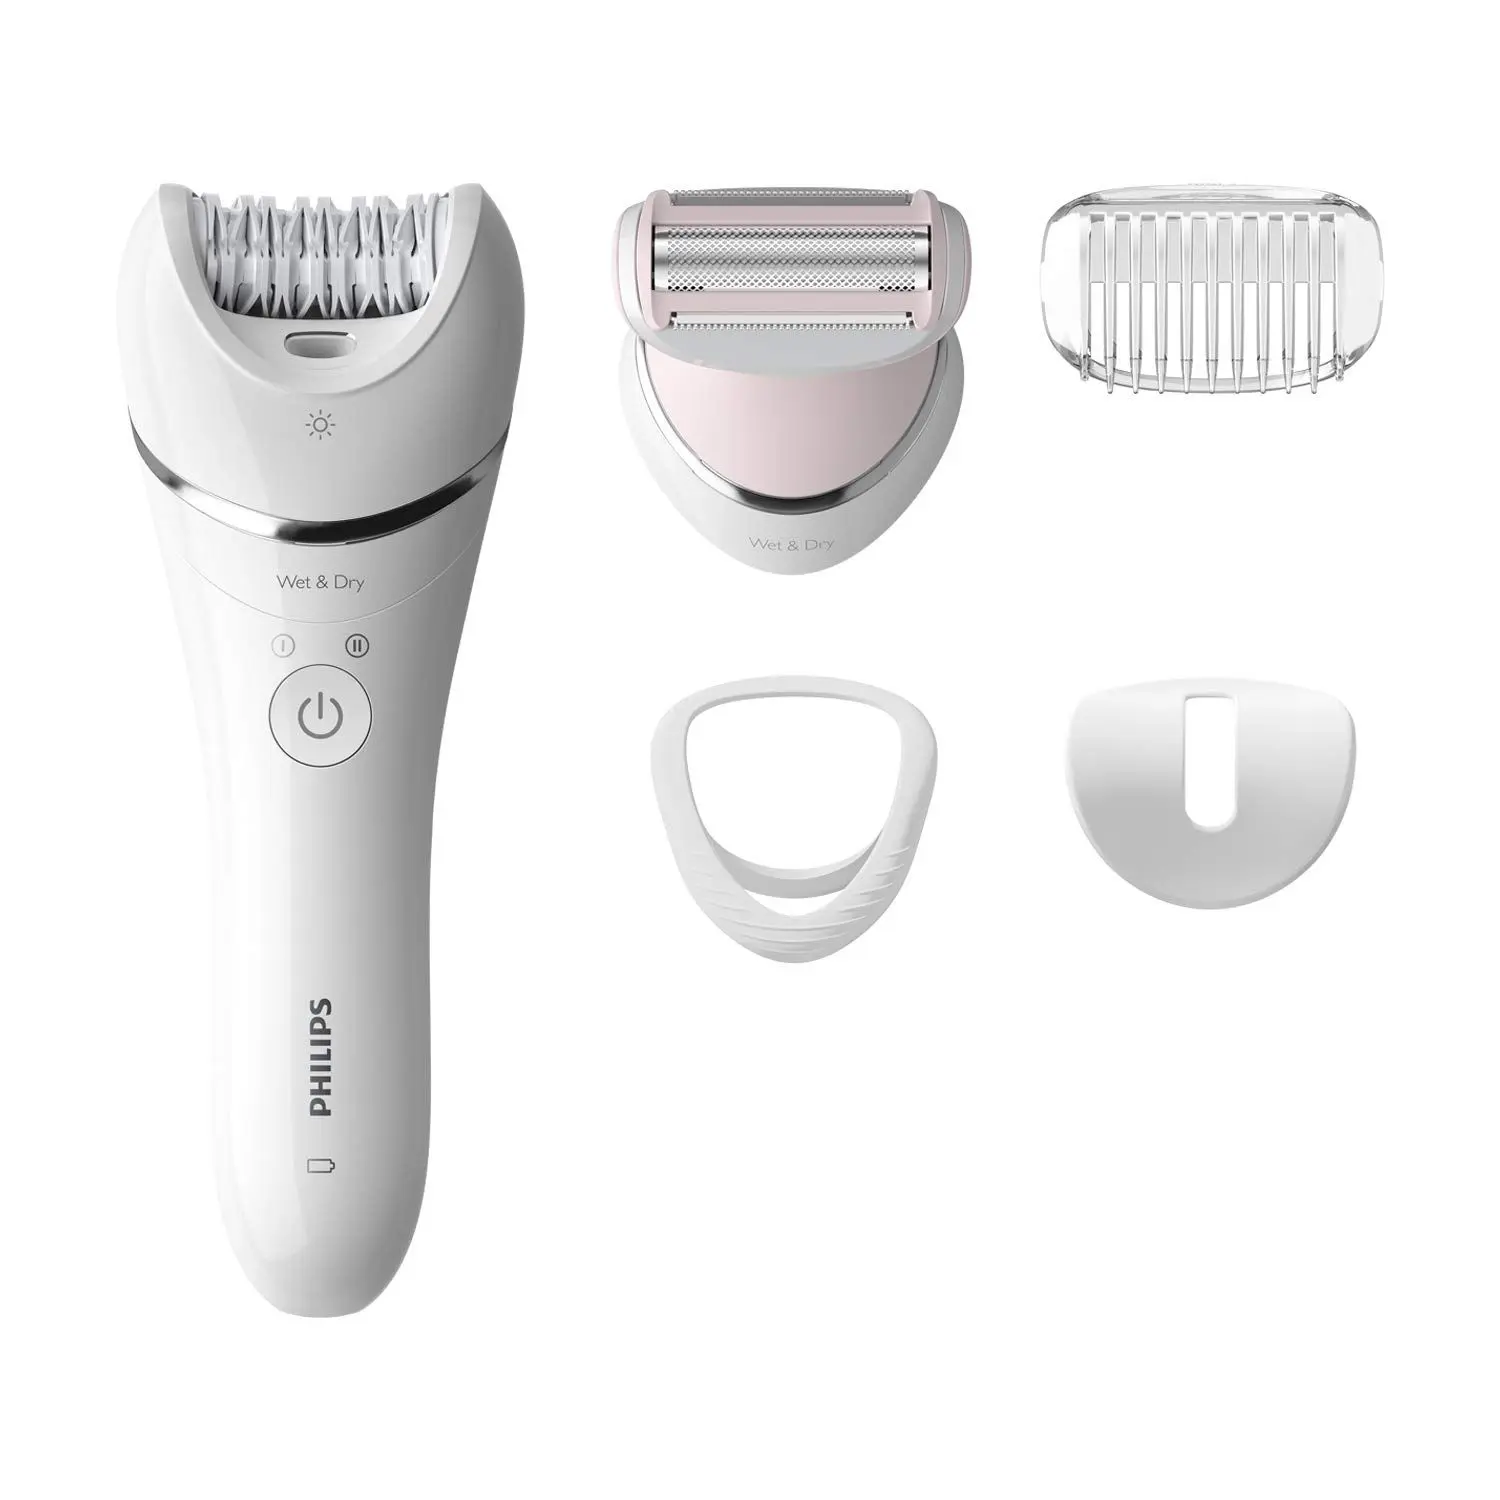 Philips BRE710/00 Cordless Epilator– All-Rounder for Face and Body Hair Removal (White)